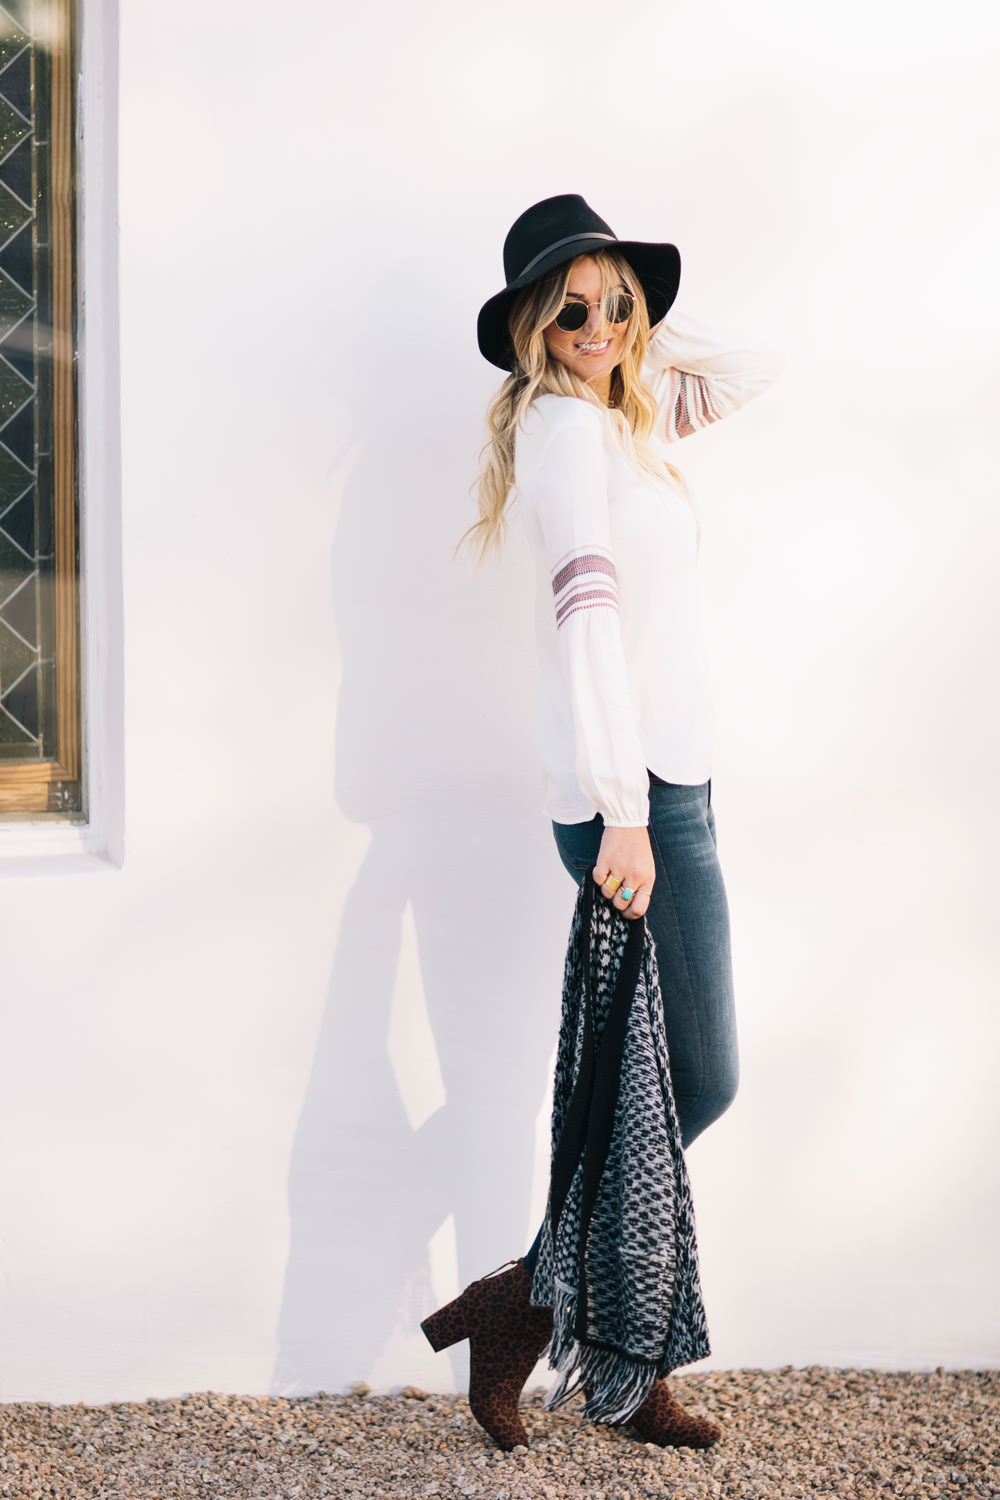 Caitlin Lindquist of the fashion blog Dash of Darling shares an easy weekend boho outfit from Loft